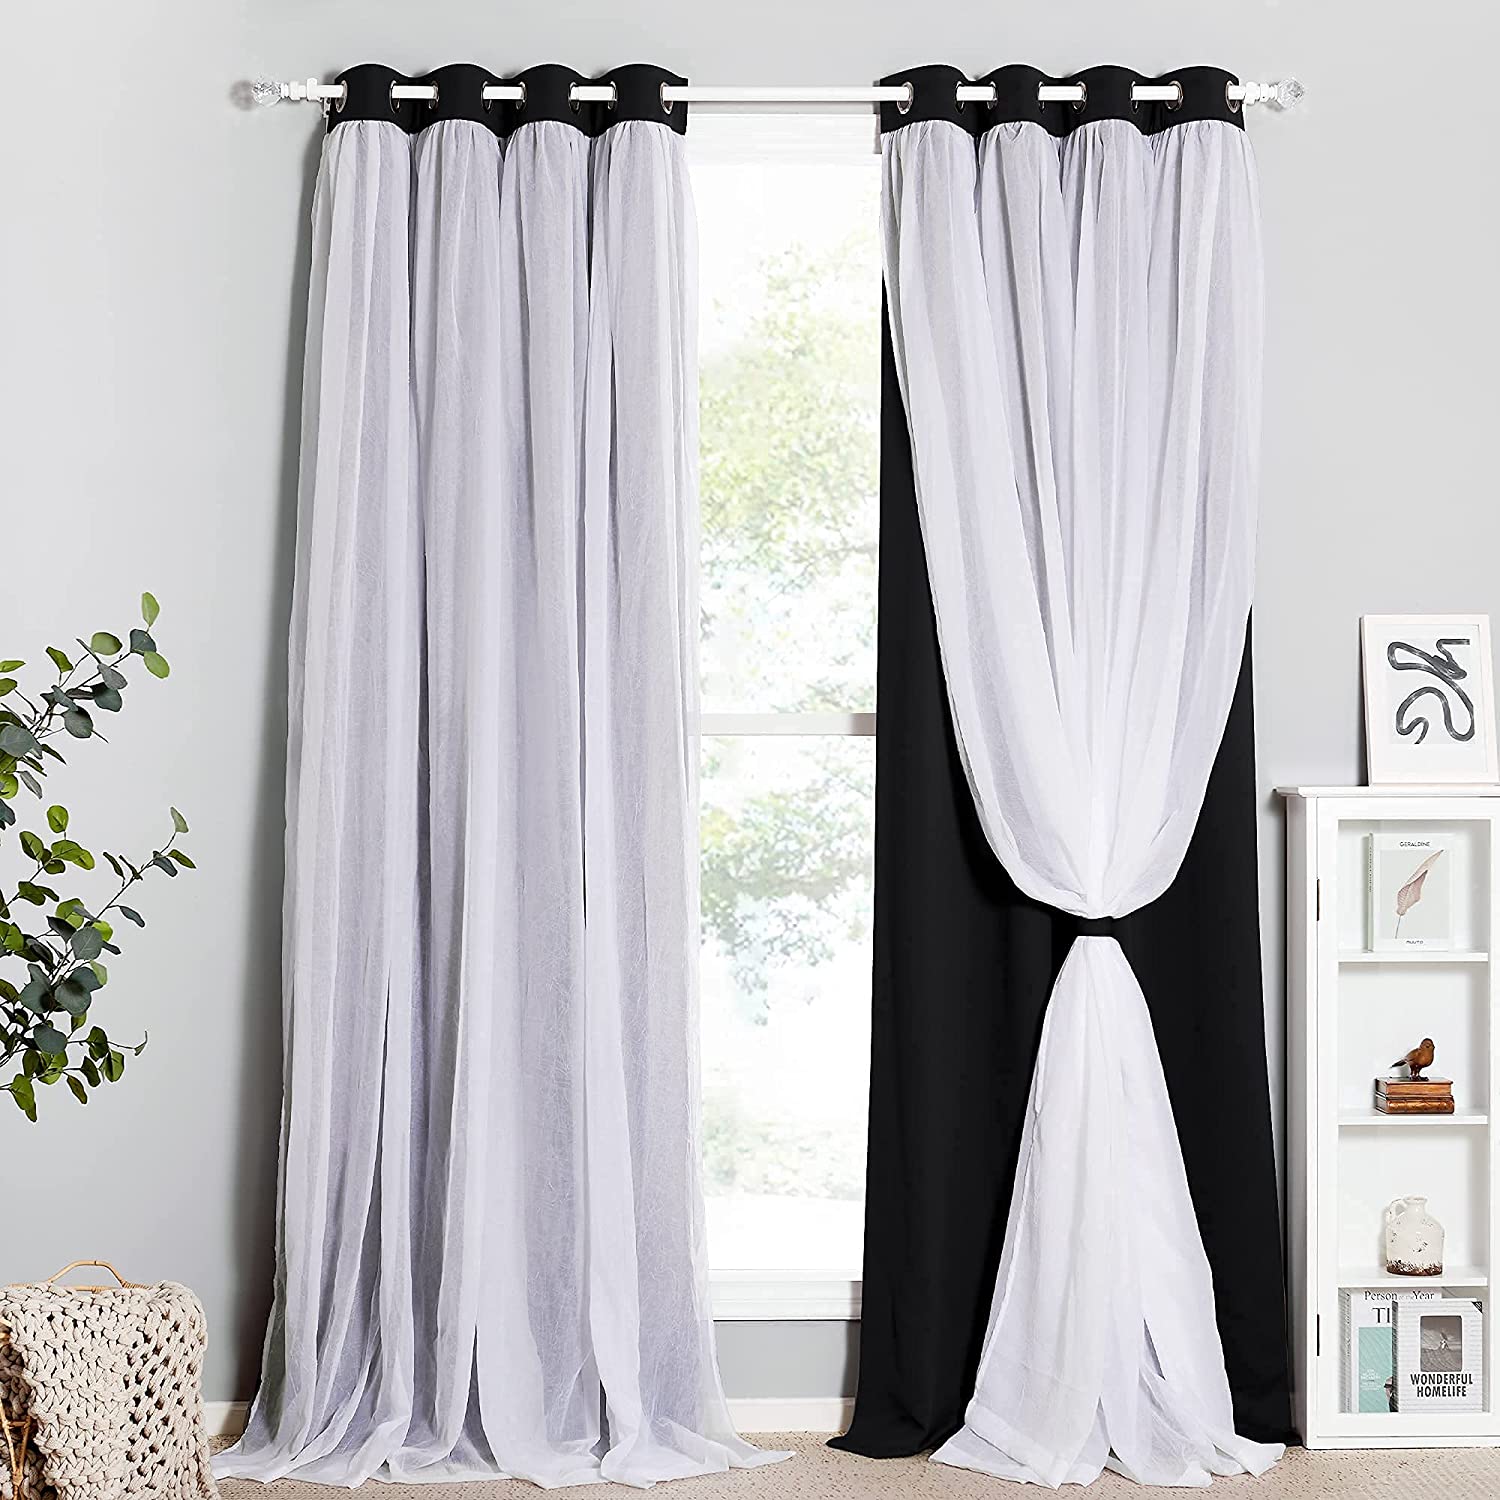 Blackout  Curtains With Crushed Voile Sheer Curtain Overlay 2 Panels KGORGE Store